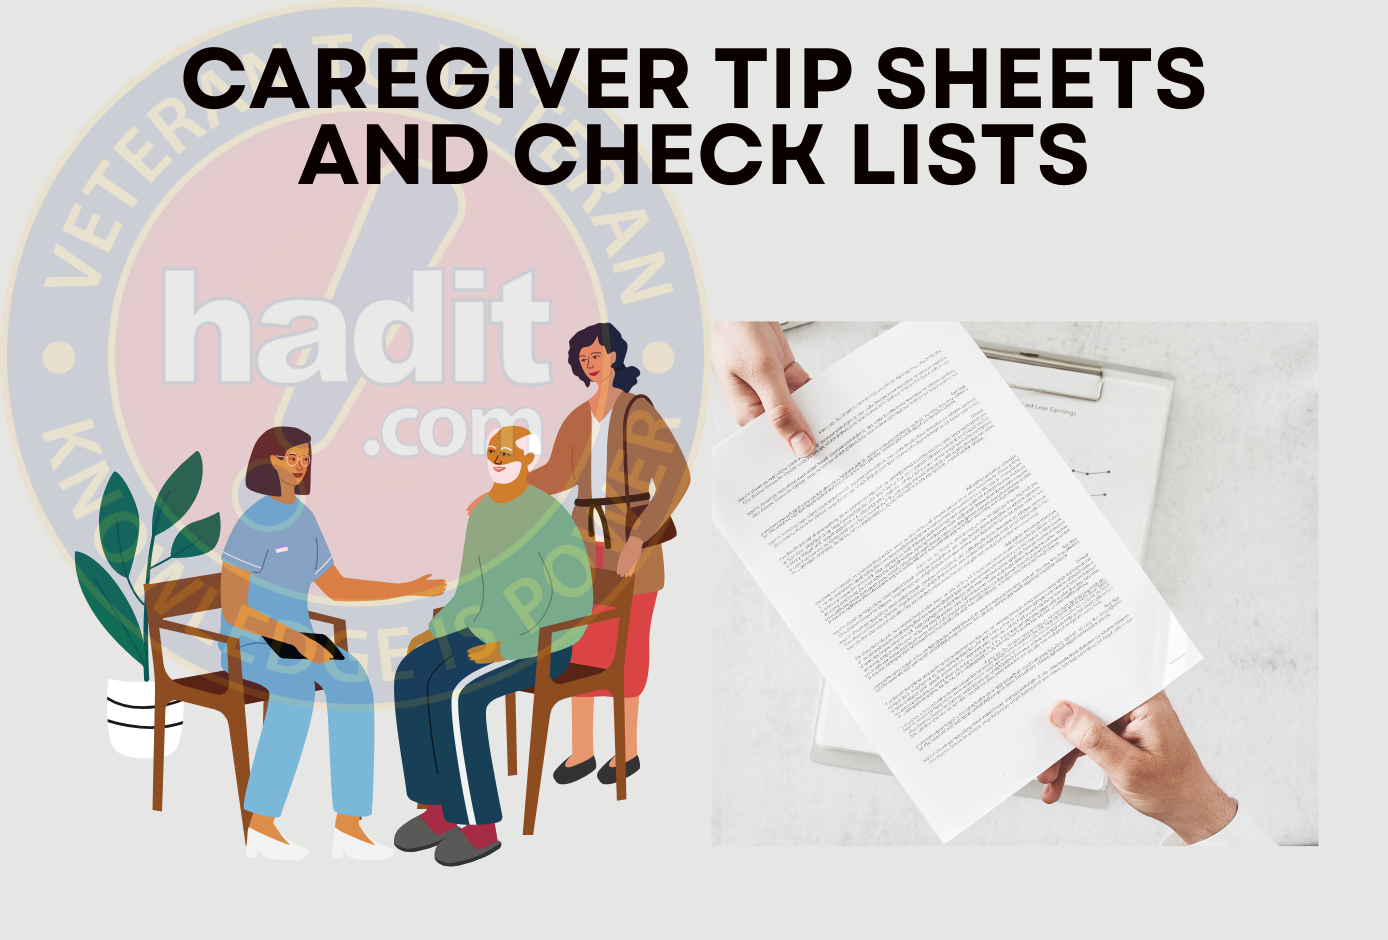 An image featuring a graphic with the text "CAREGIVER TIP SHEETS AND CHECKLISTS" alongside an illustration of three individuals seated at a table appearing to have a conversation with a watermark of the text "hadit.com." To the right, a hand holding a sheet of paper with dense text, atop additional papers resting on a white surface.